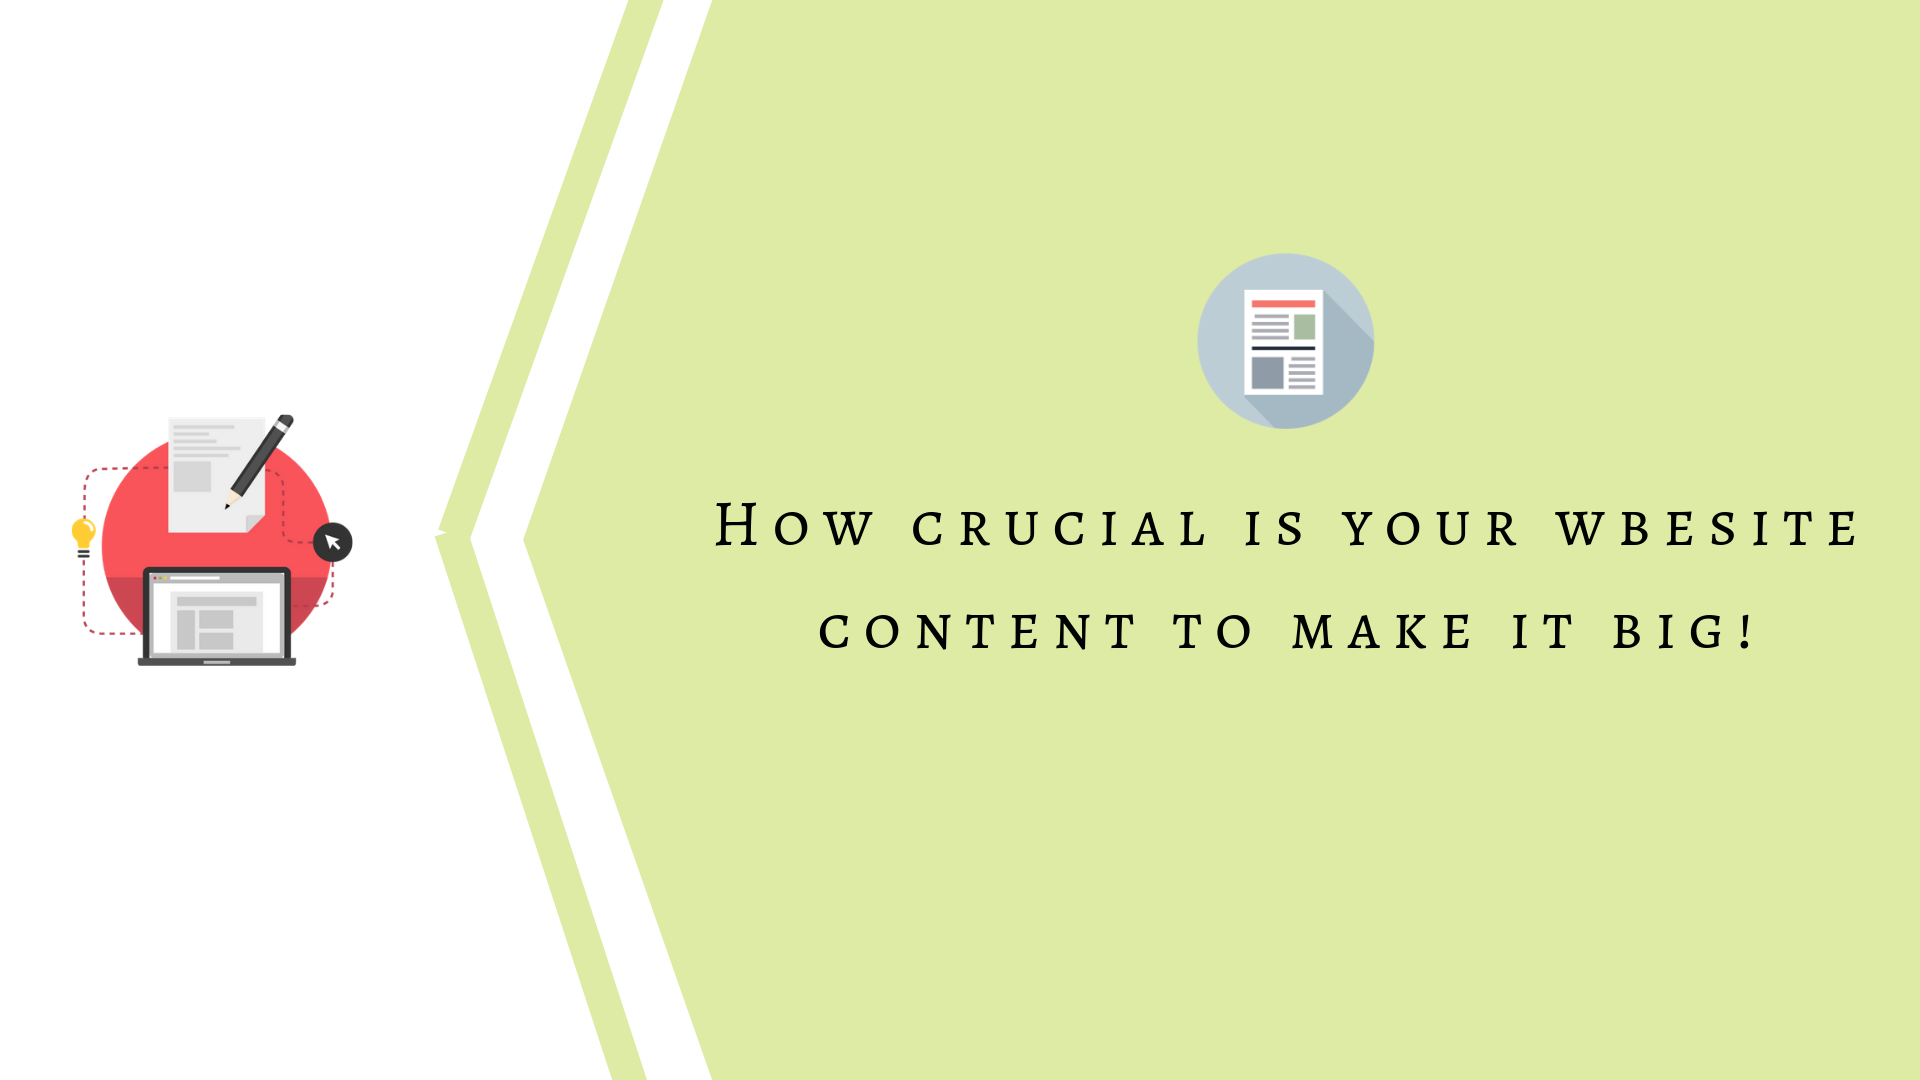 How Crucial is Your Website Content to Make it Big!